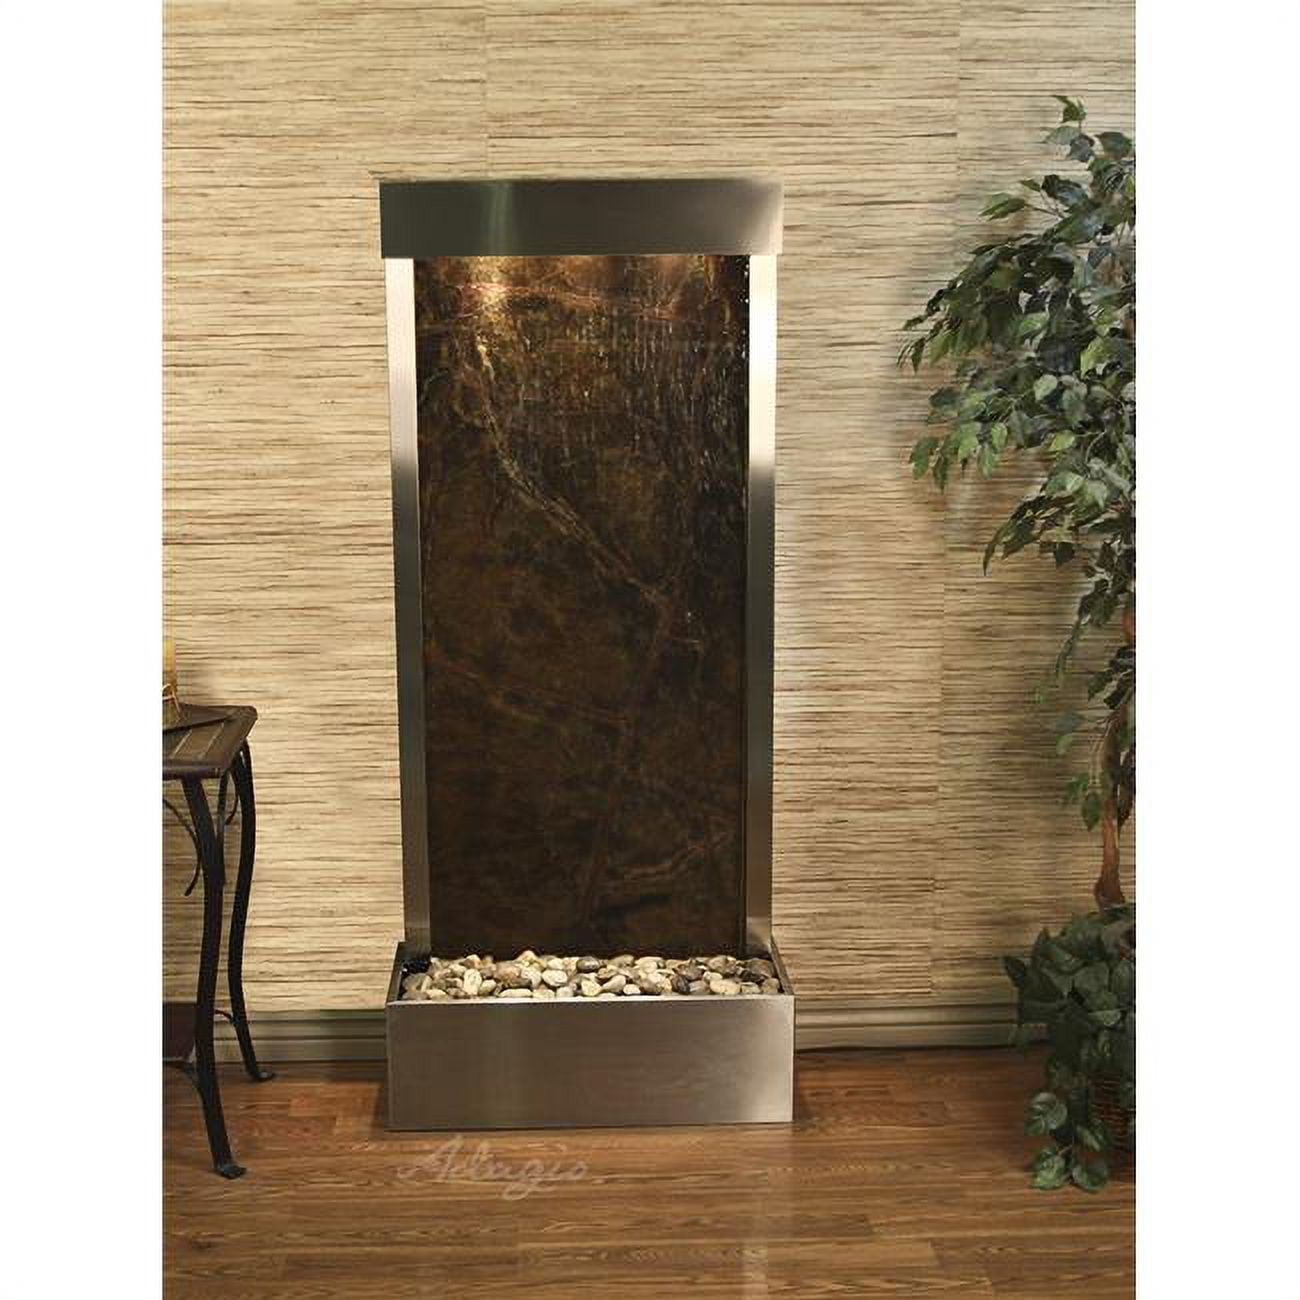 Adagio HRF2005 Harmony River Flush Mount Stainless Steel Green Marble Wall Fountain